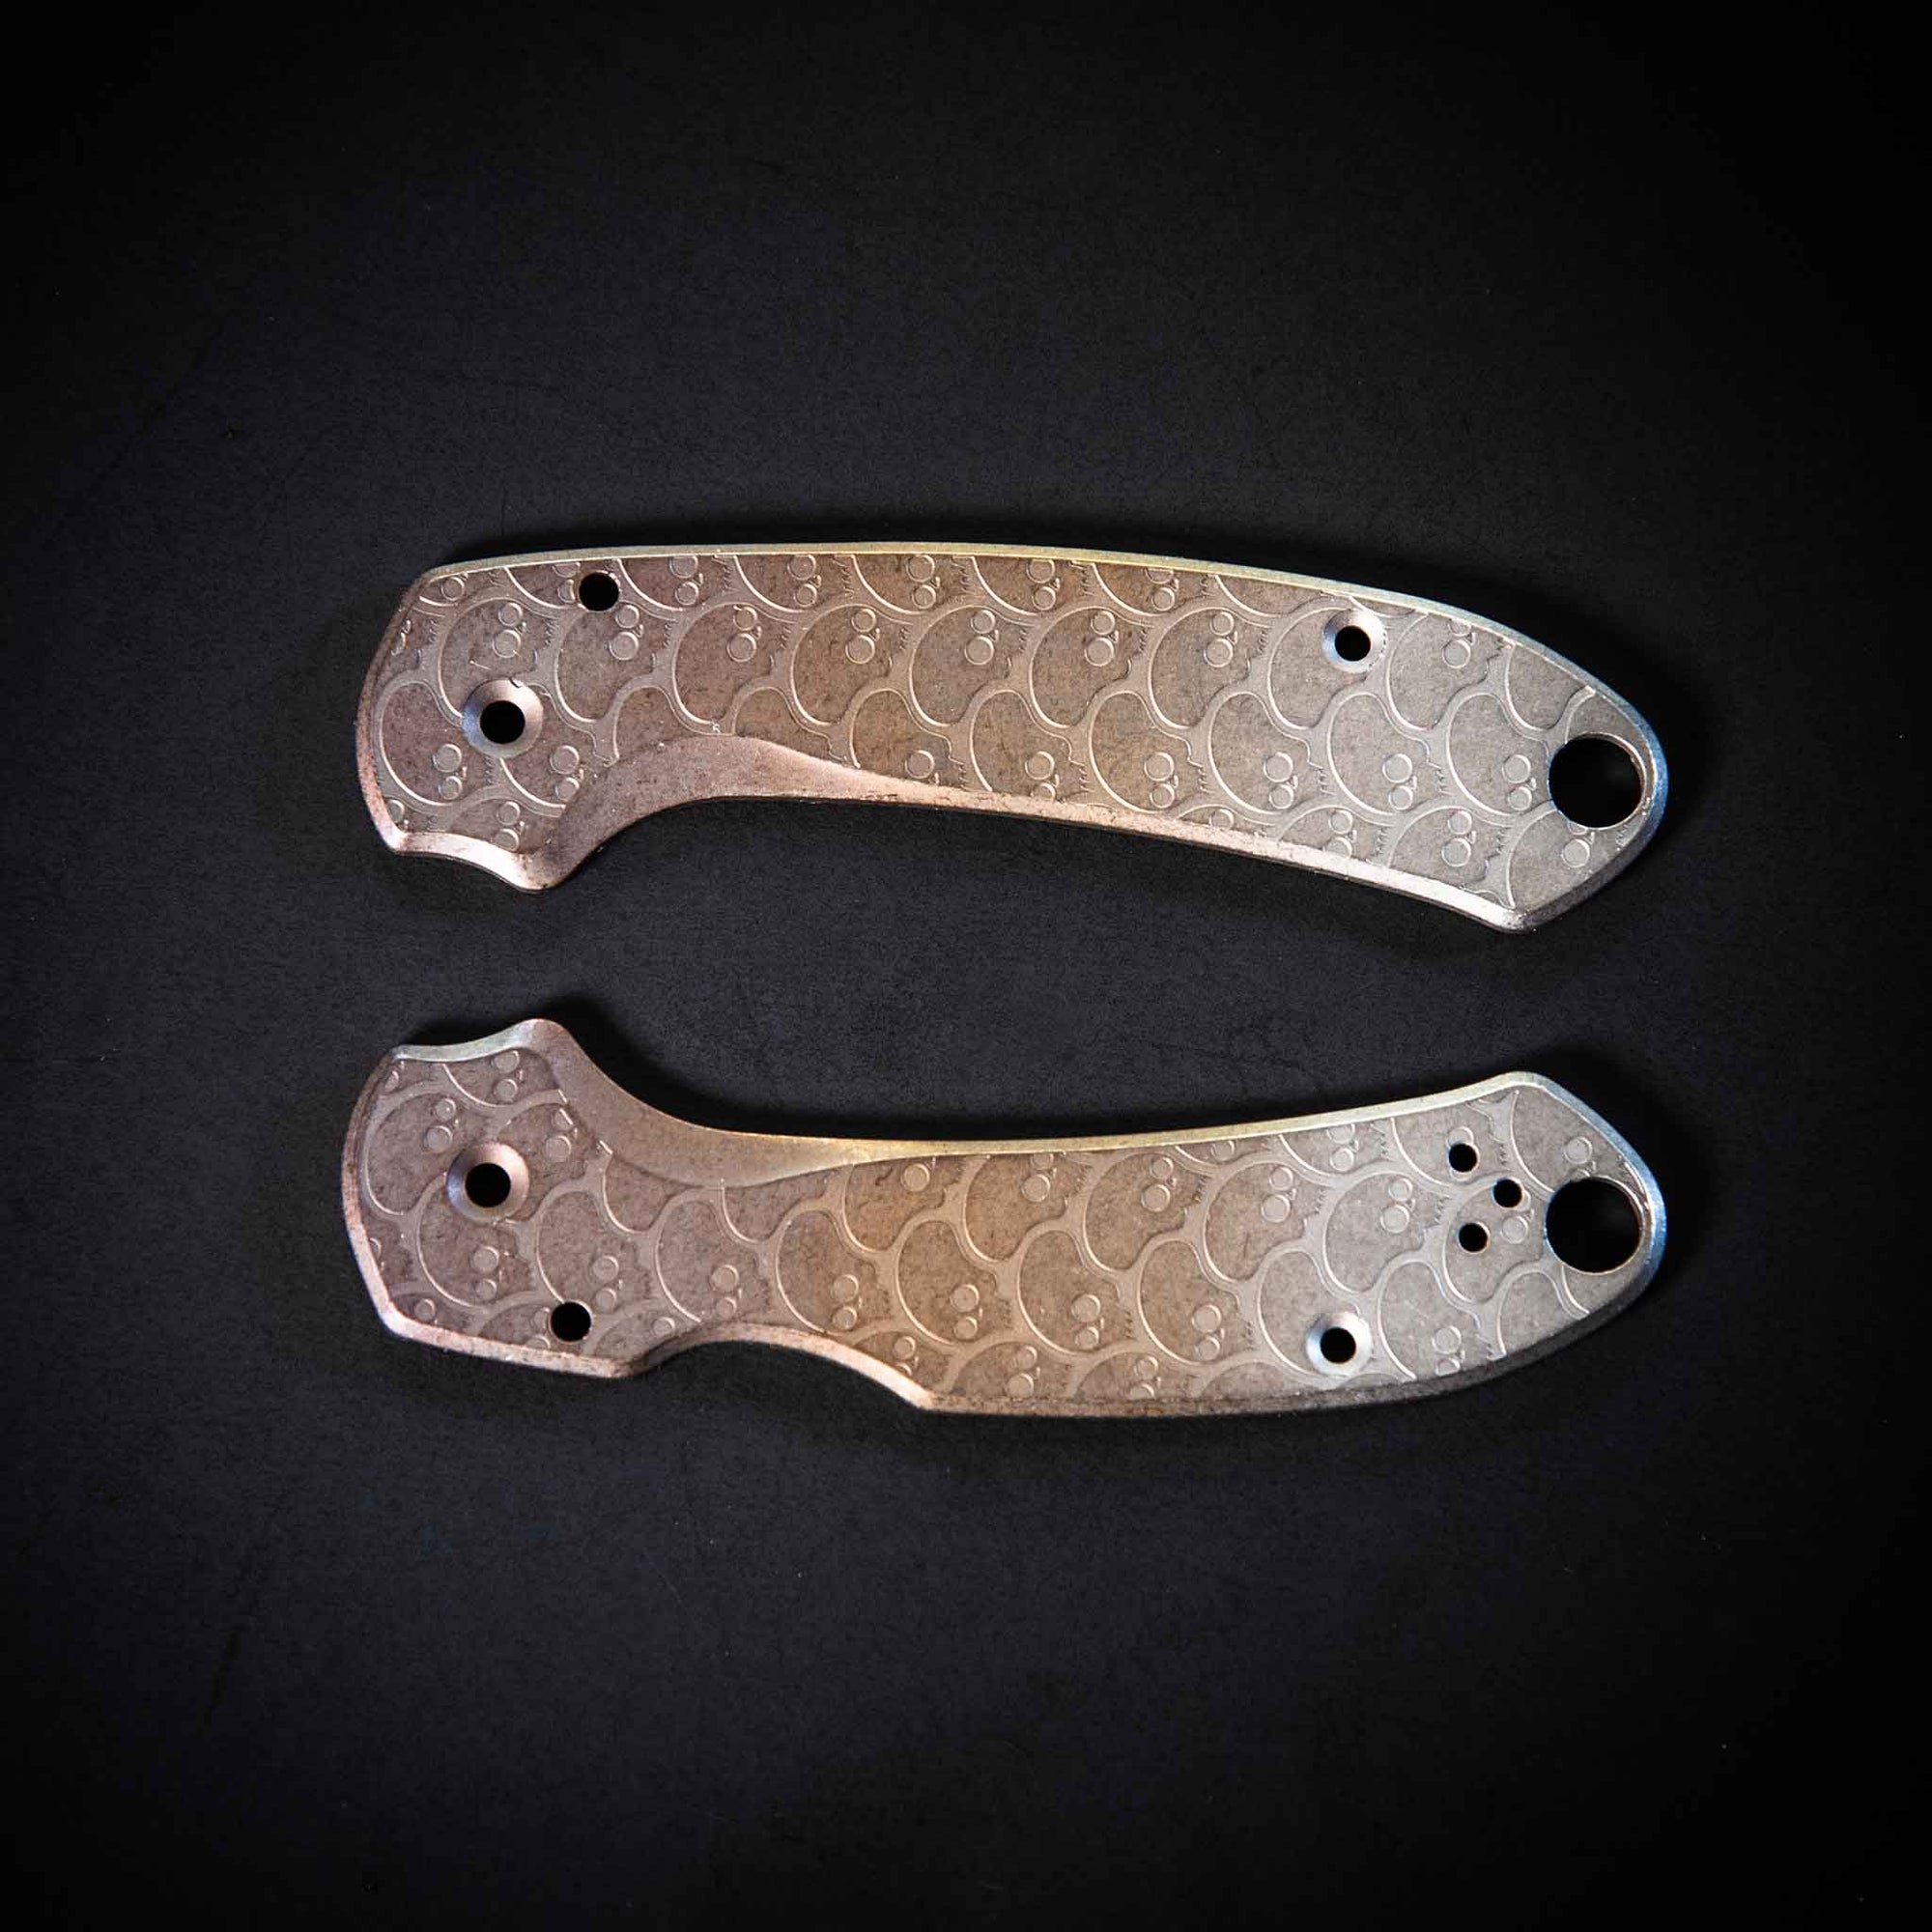 Flytanium X PLAYGE - Warm Fade Ano Titanium Scales for Spyderco Para 3